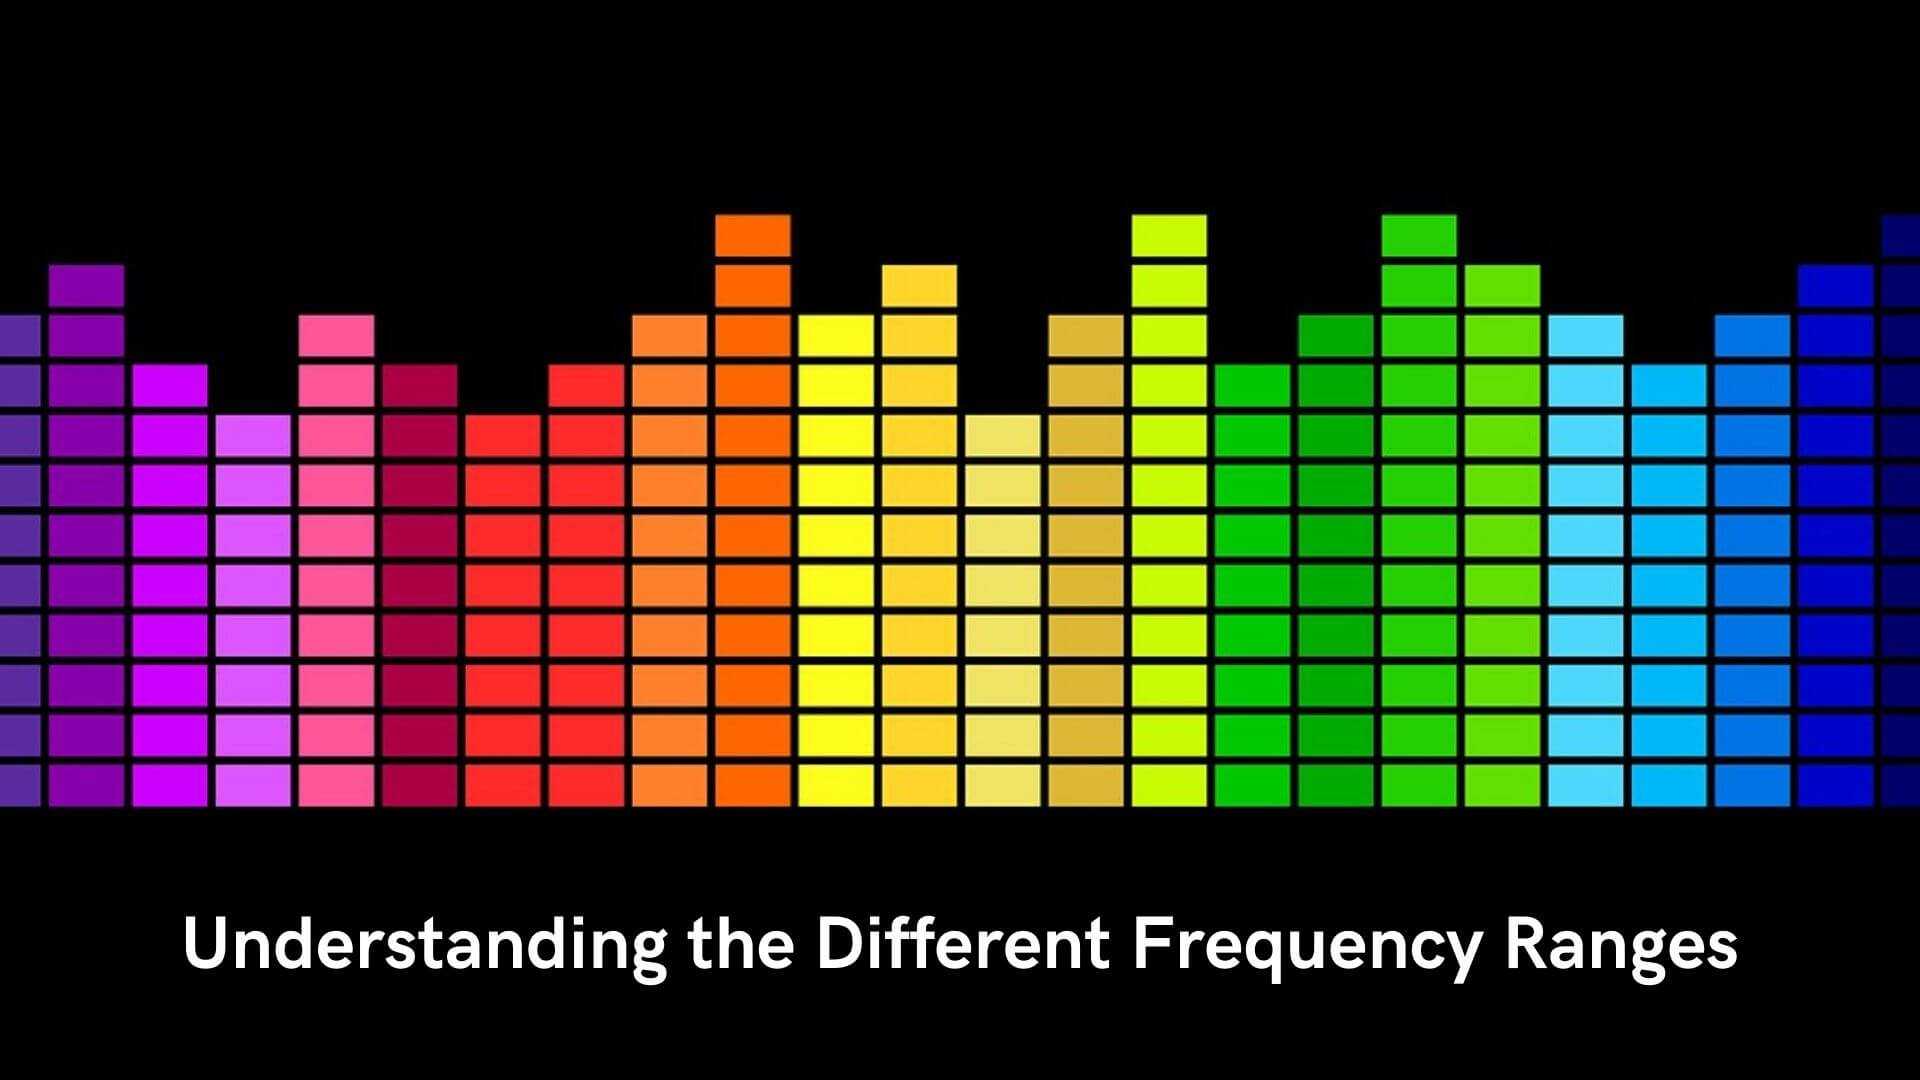 The Human Hearing Frequency Range and Audible Sounds